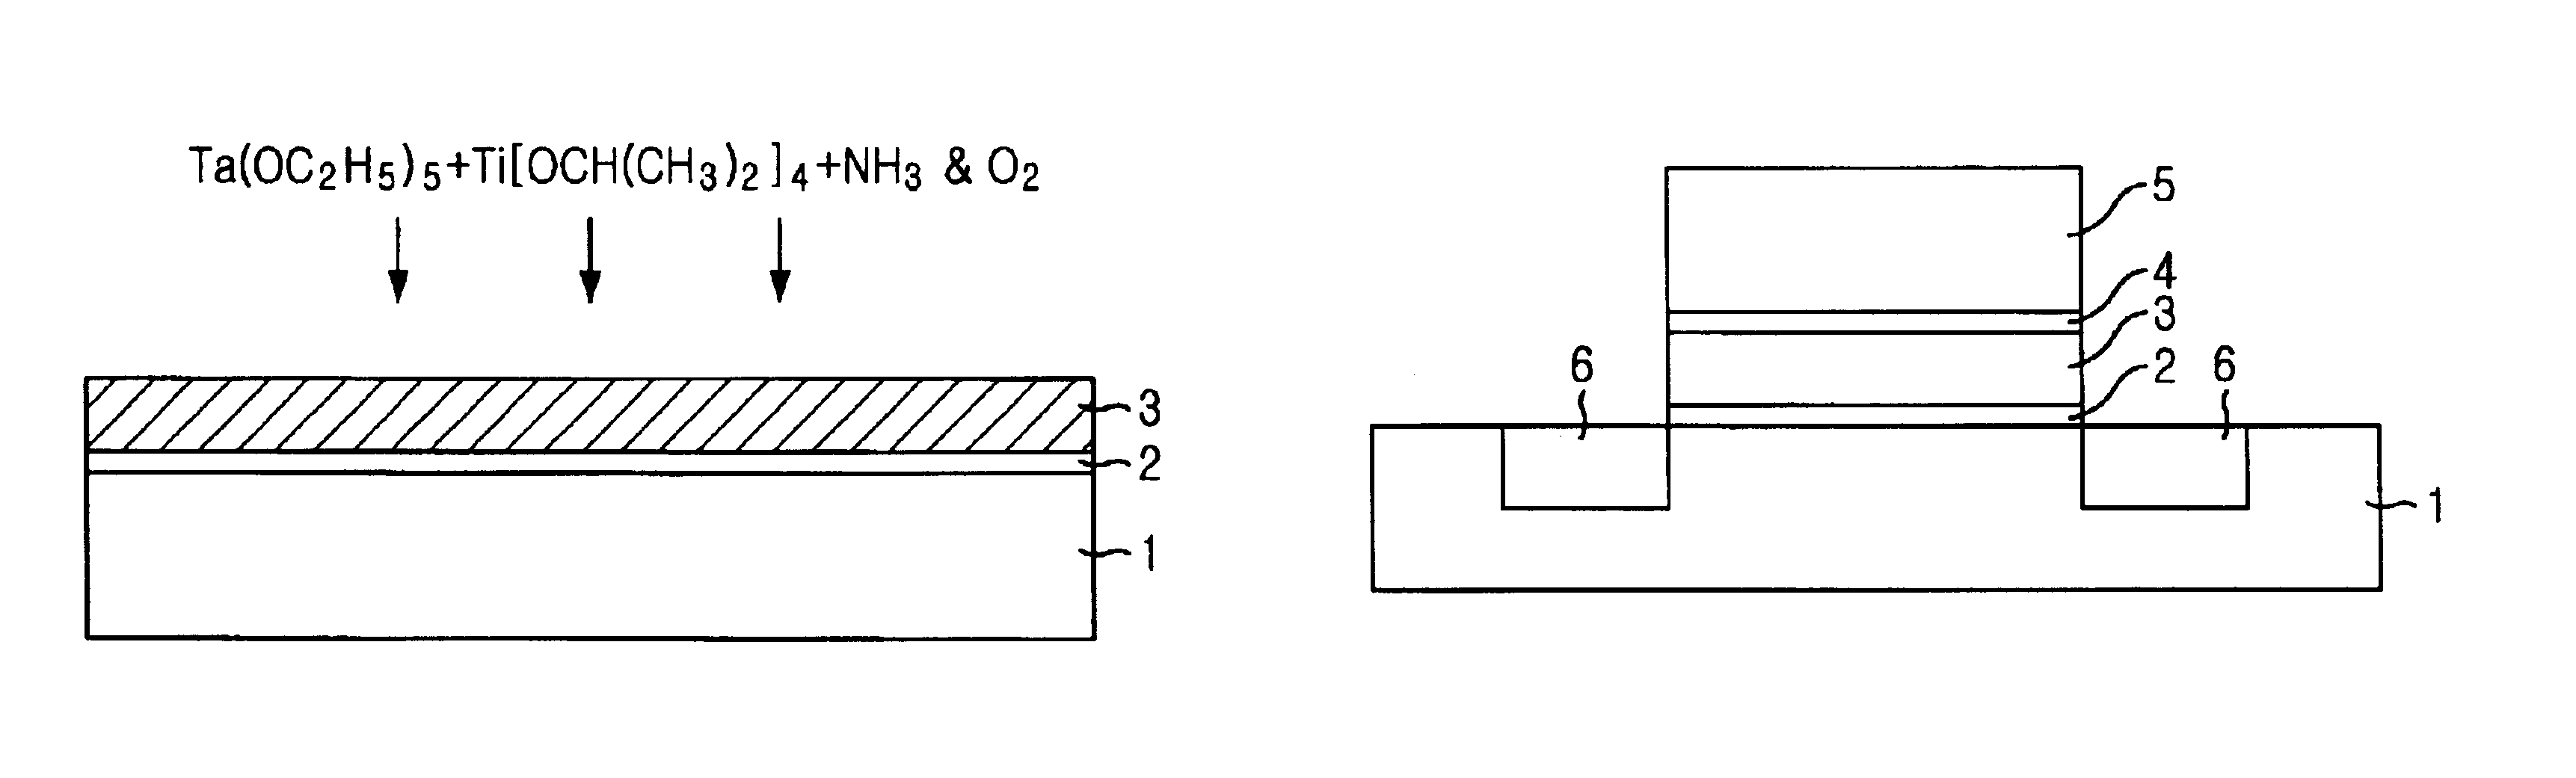 Method for forming a dielectric layer in a semiconductor device